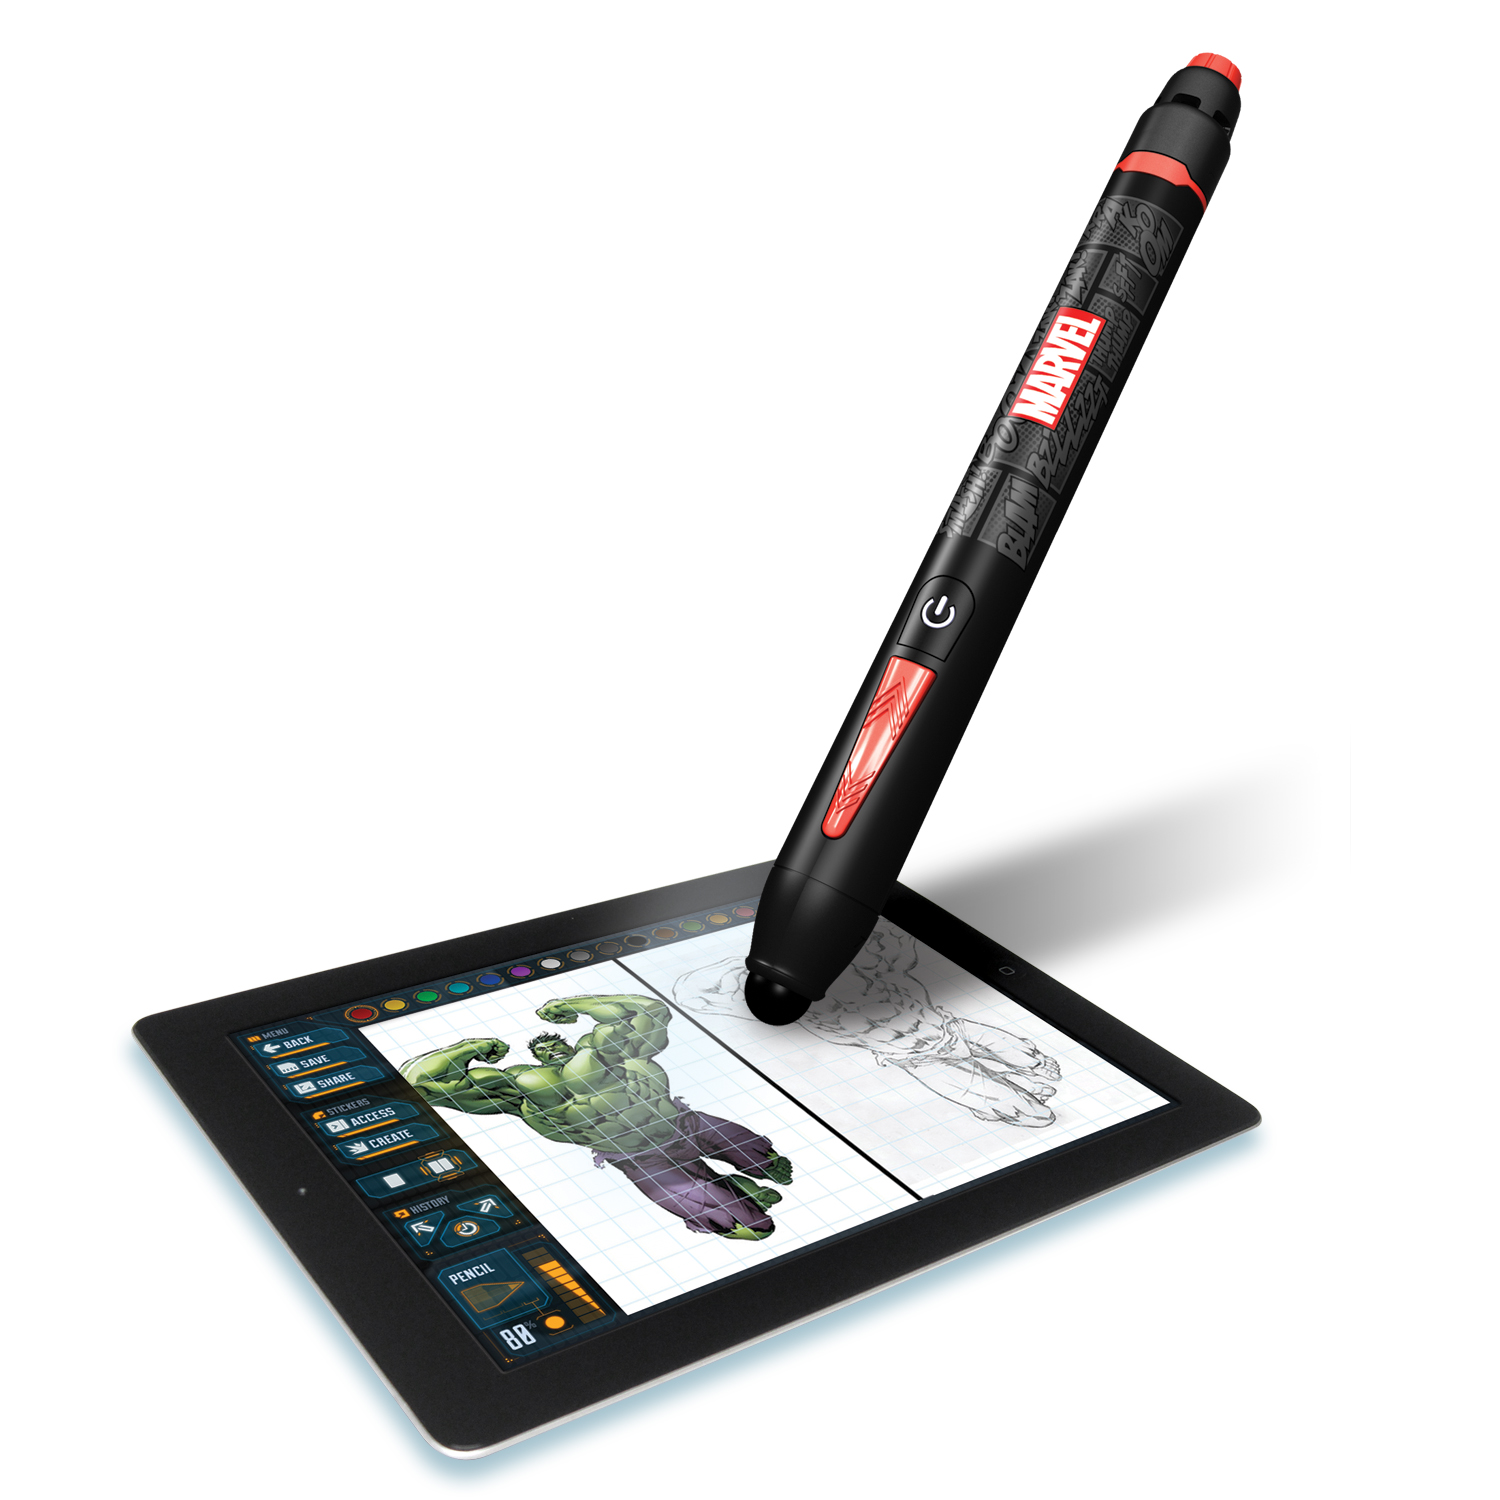 Marvel Creativity Studio Stylus and App for iPad now available - GoCollect